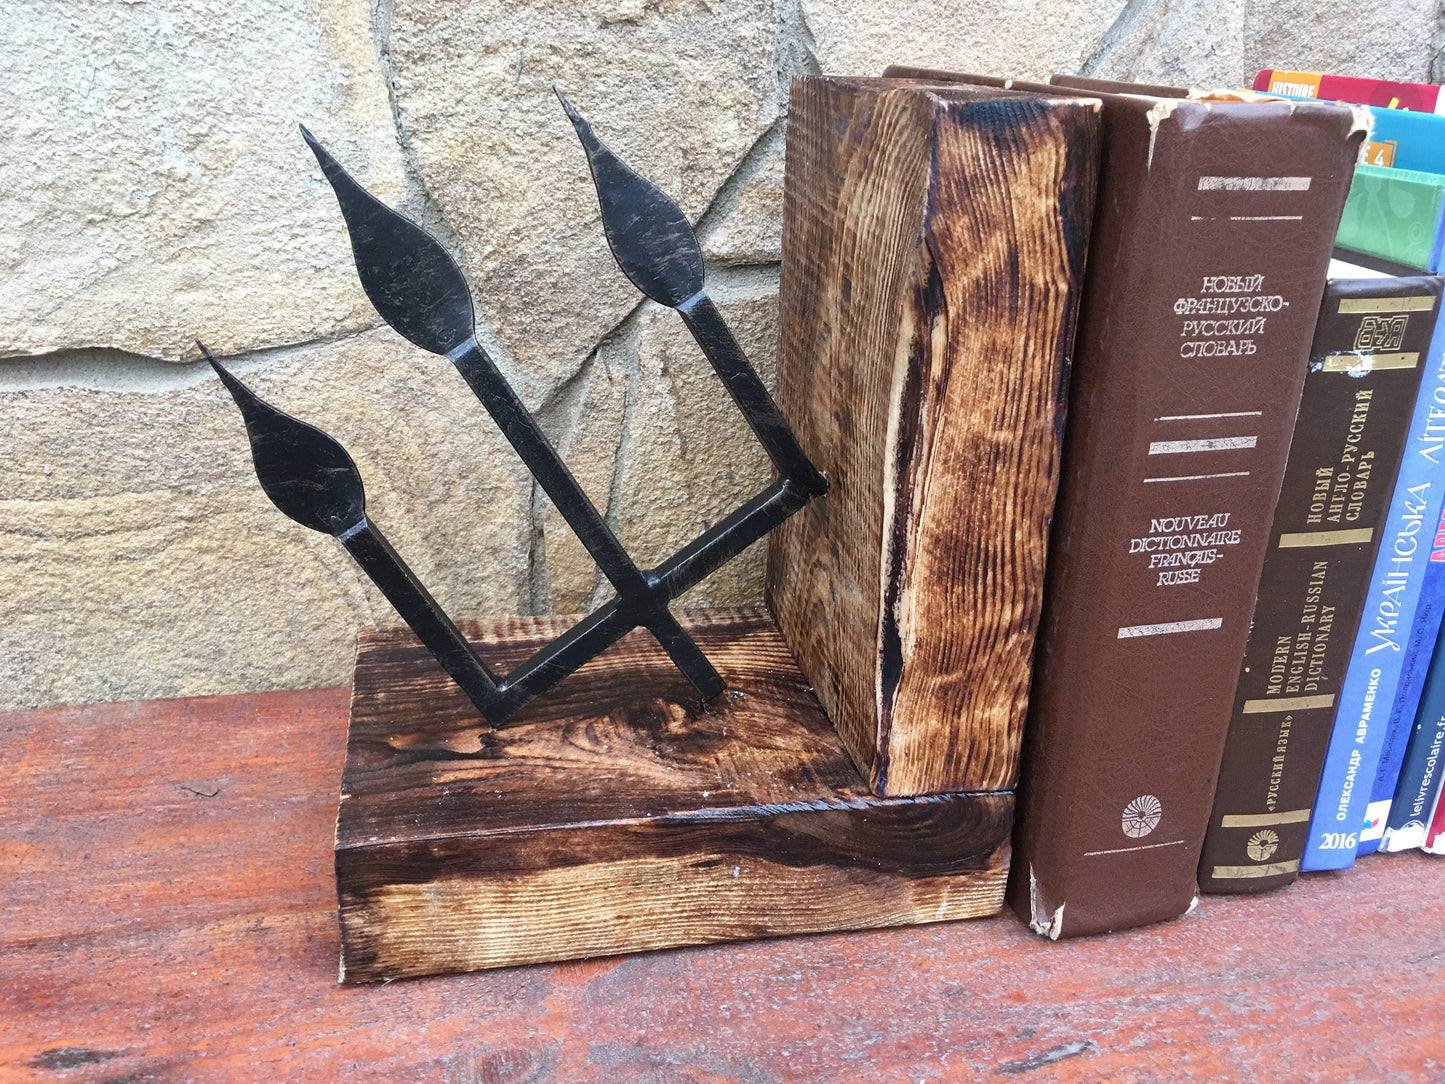 Bookends, trident, book ends, book lover, bookend, book lover gift, book end, book holders, bookends gothic, bookends custom,bookends rustic